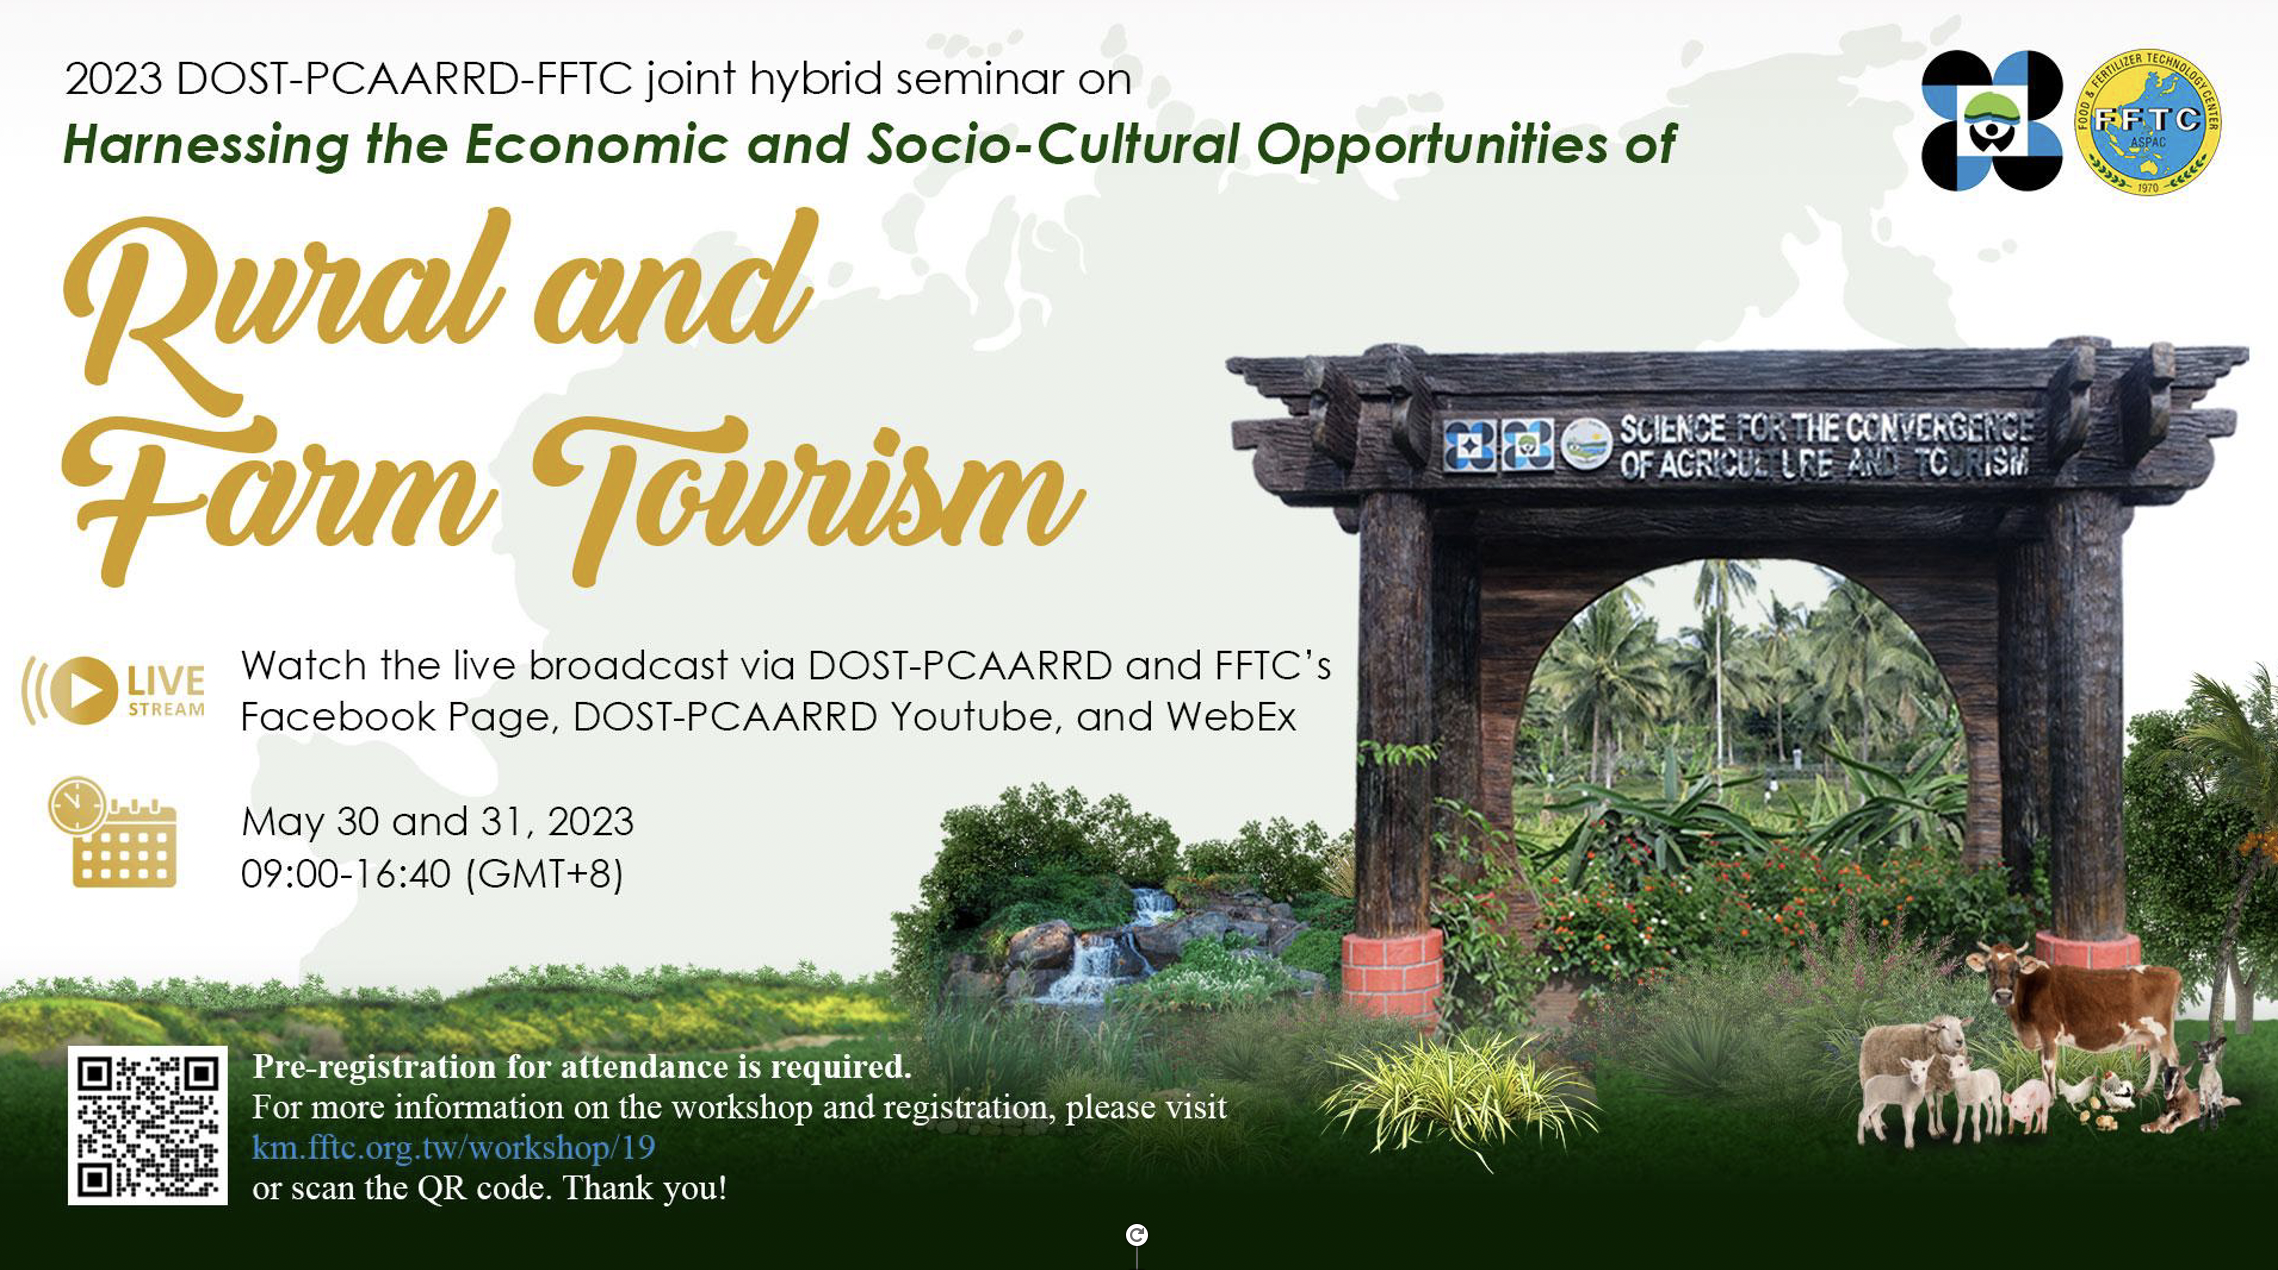 Official event banner of the DOST-PCAARRD and FFTC seminar